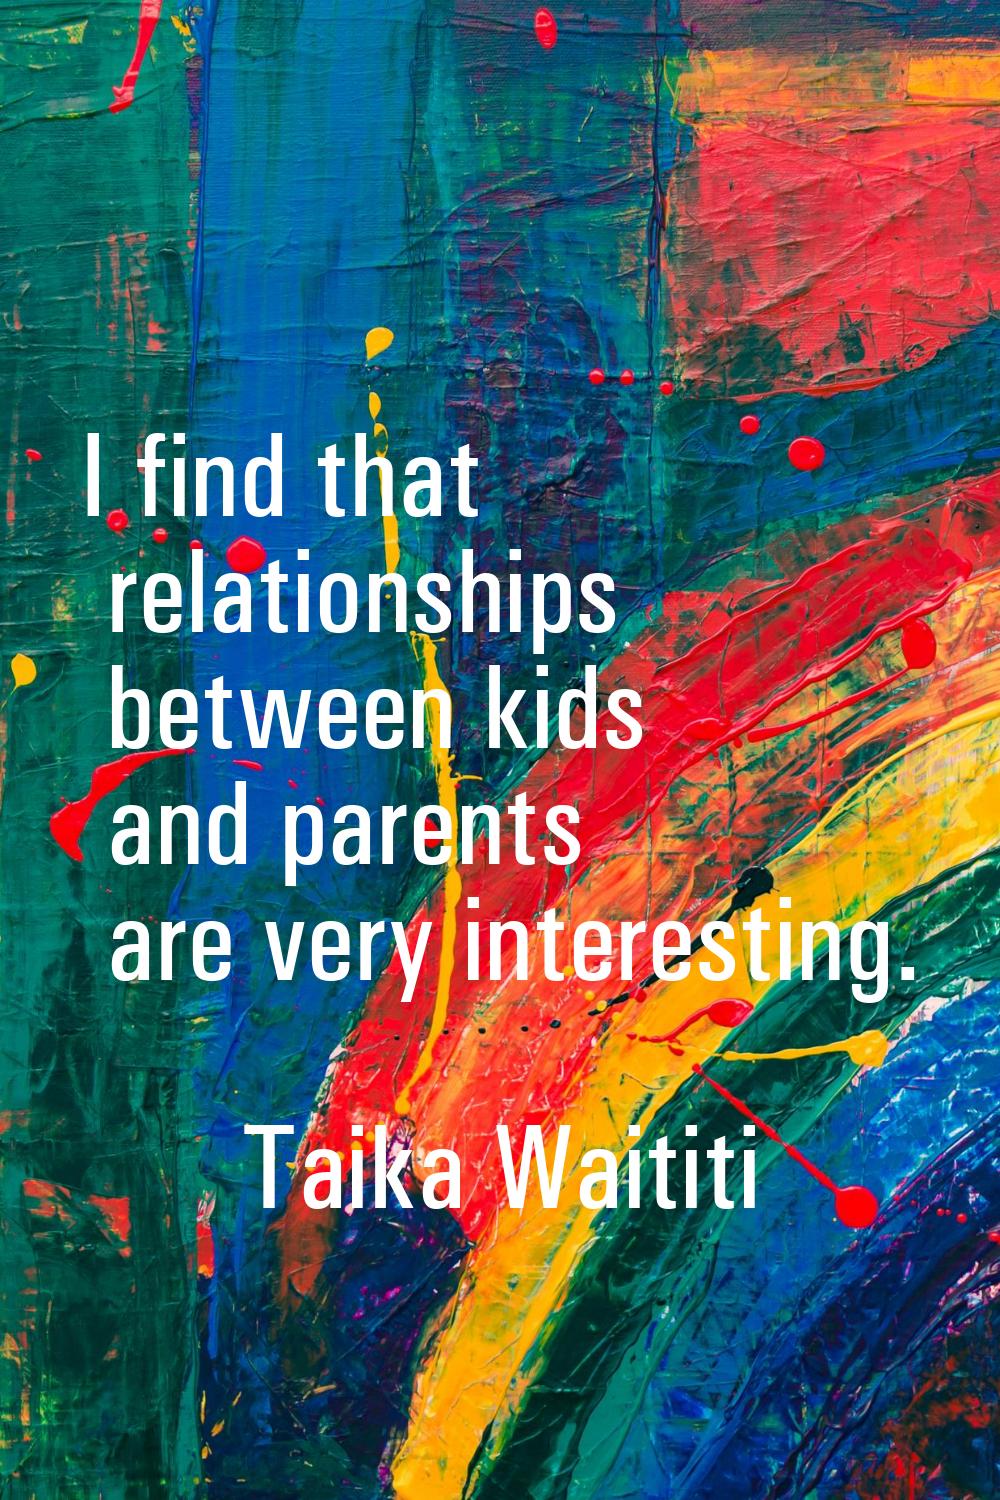 I find that relationships between kids and parents are very interesting.